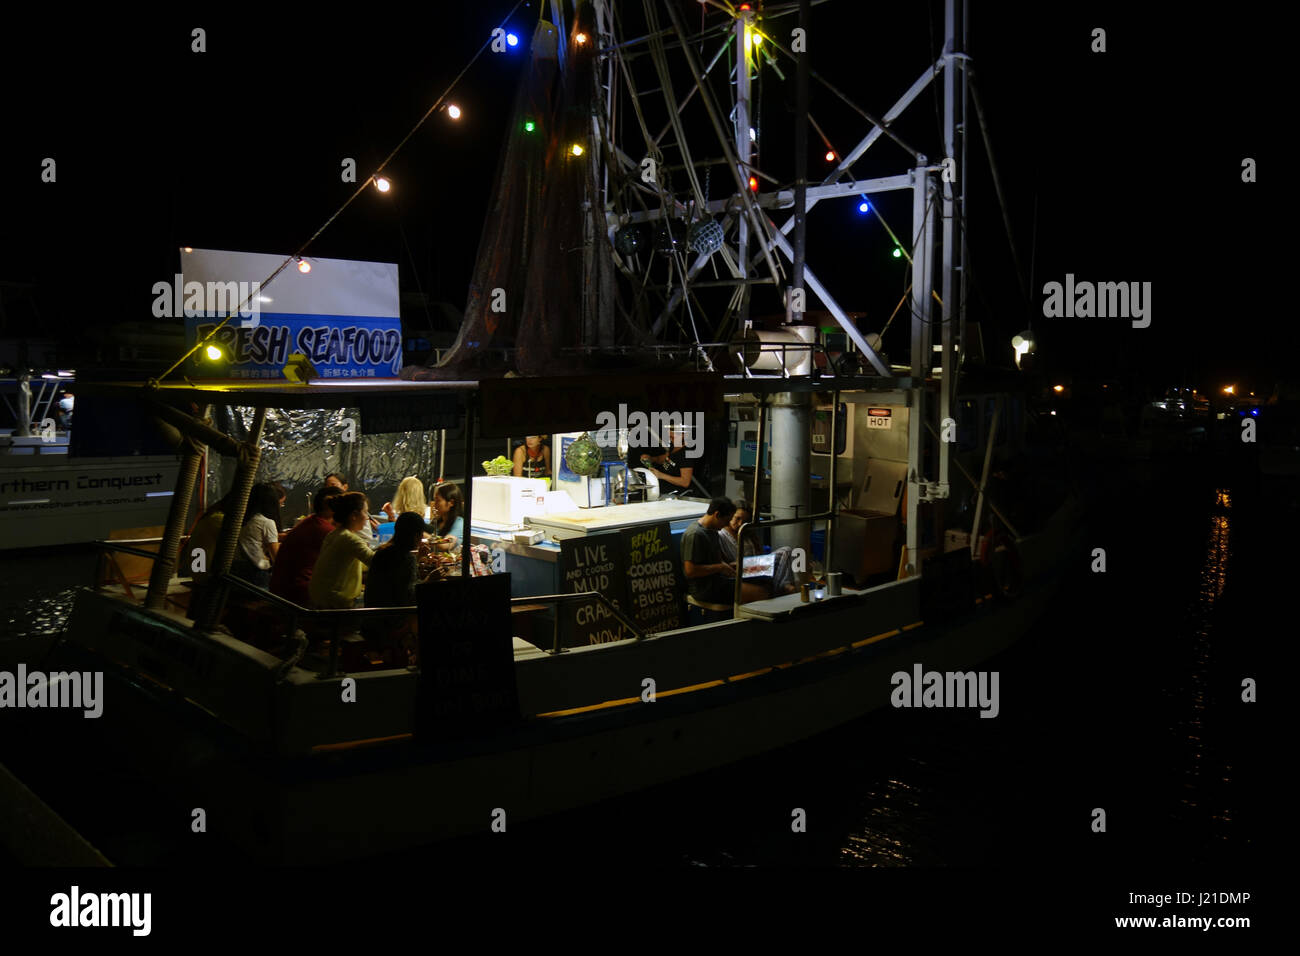 People eating at Prawn Star, trawler converted to a seafood restaurant, Cairns marina, Queensland, Australia. No MR or PR Stock Photo